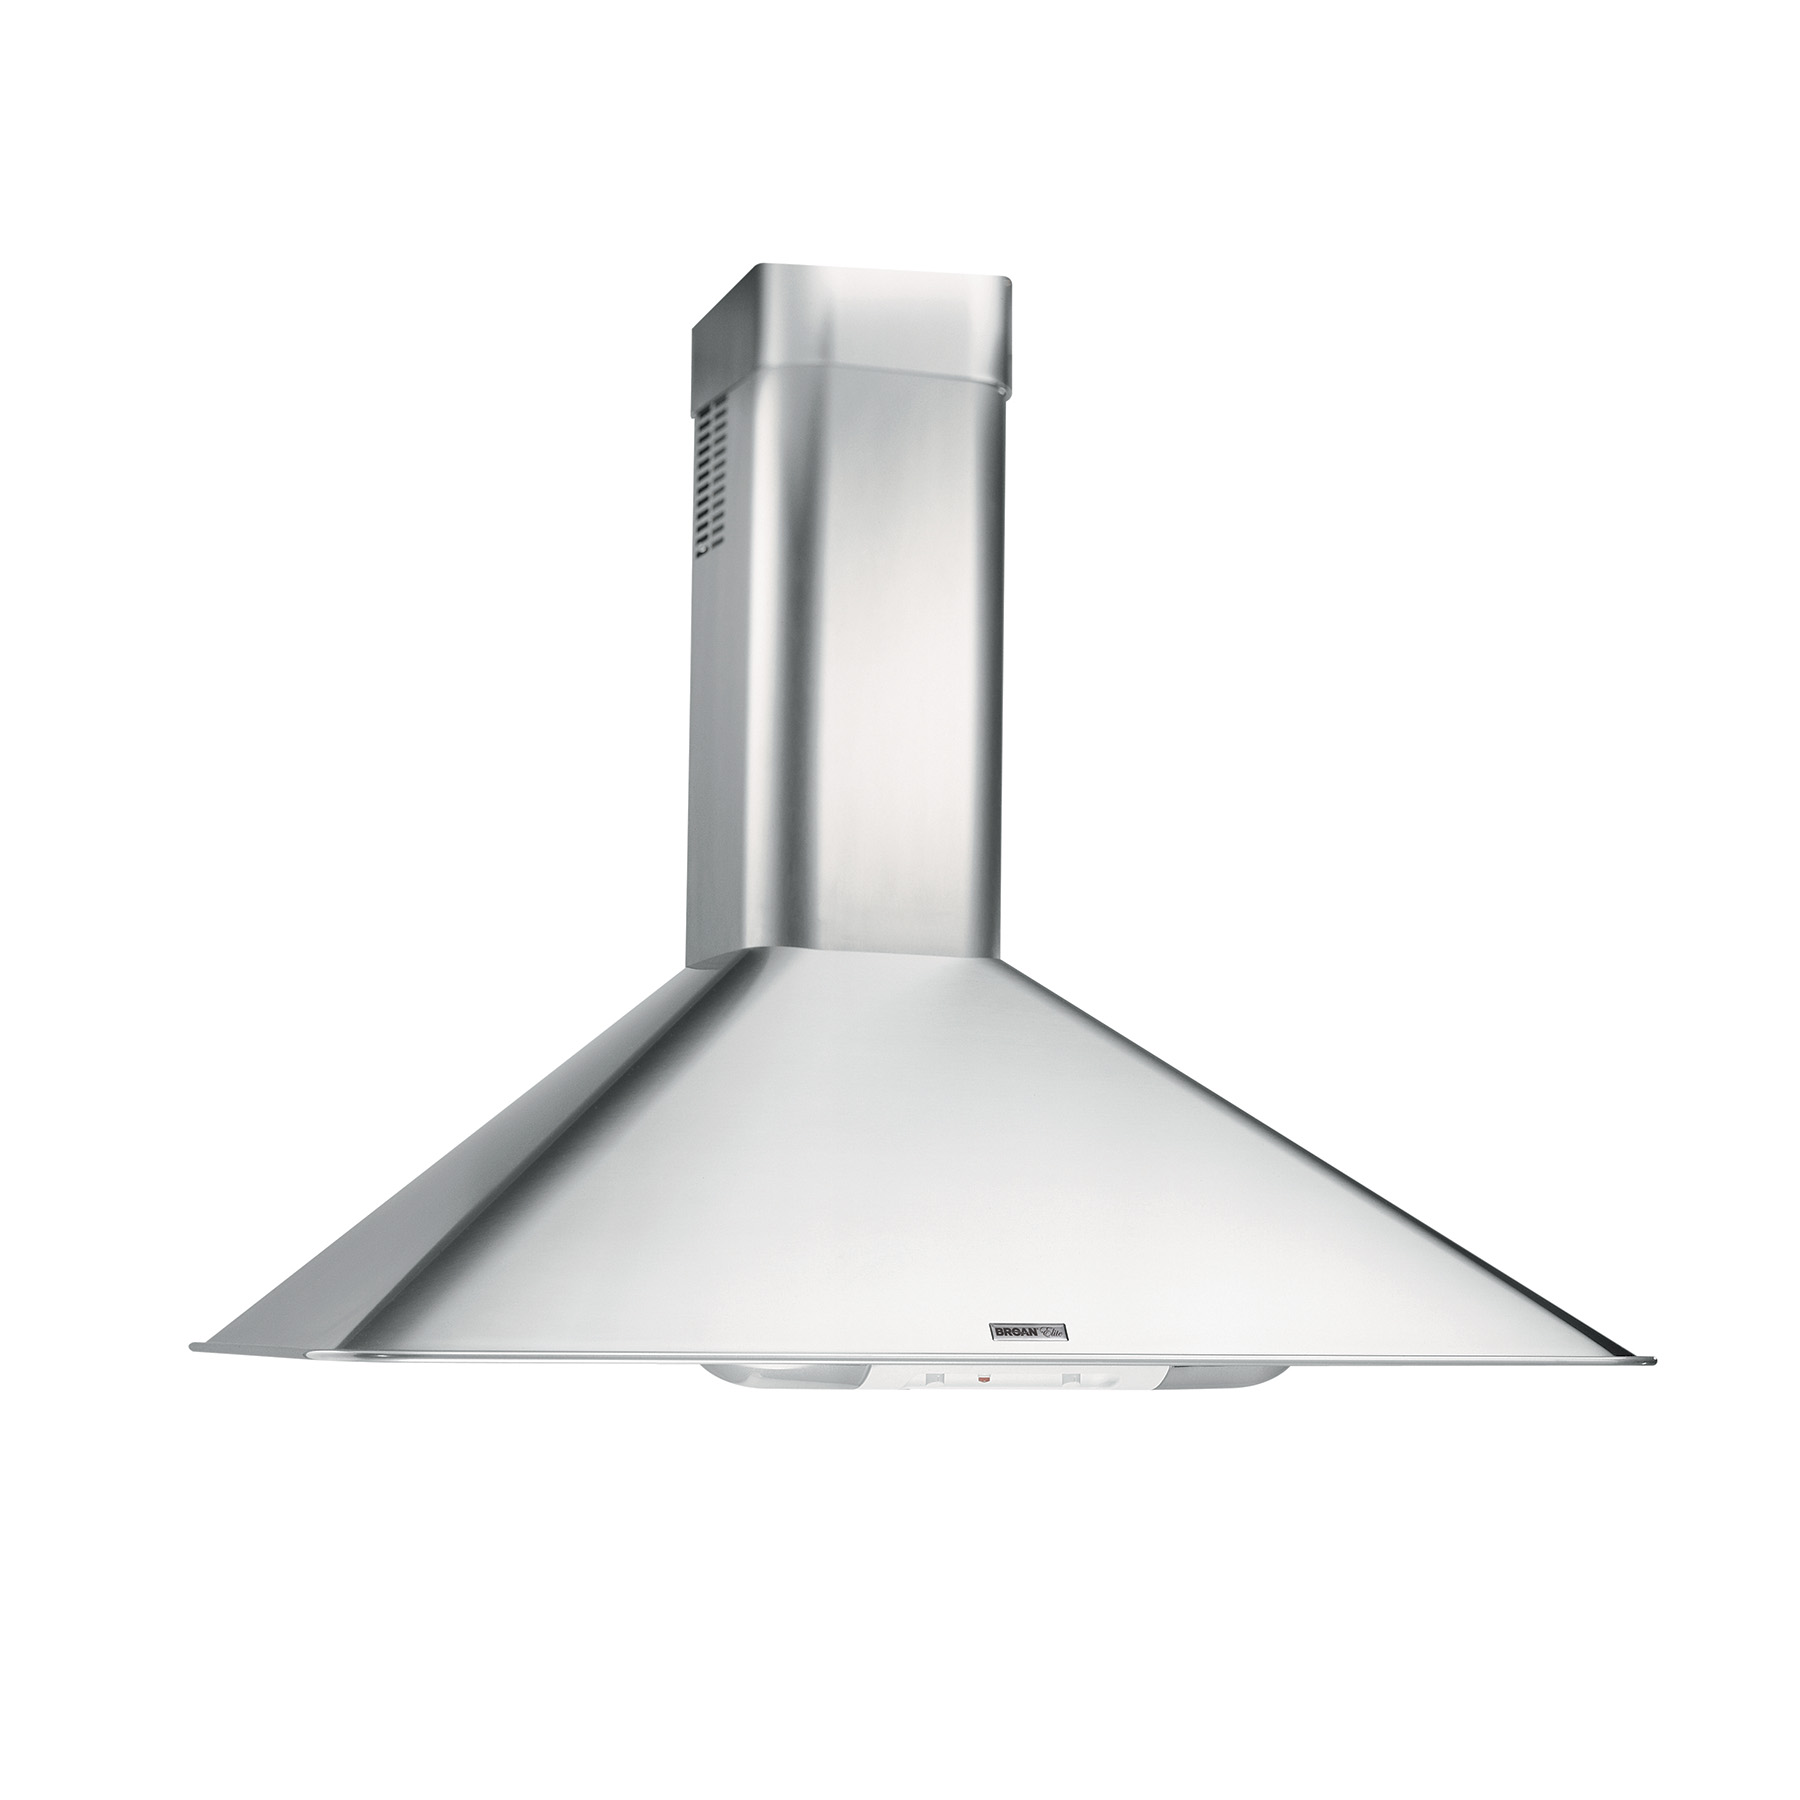 DISCONTINUED-Broan® 36-Inch Convertible Wall-Mount Chimney Range Hood w/ Heat Sentry™, 290 CFM, Stainless Steel